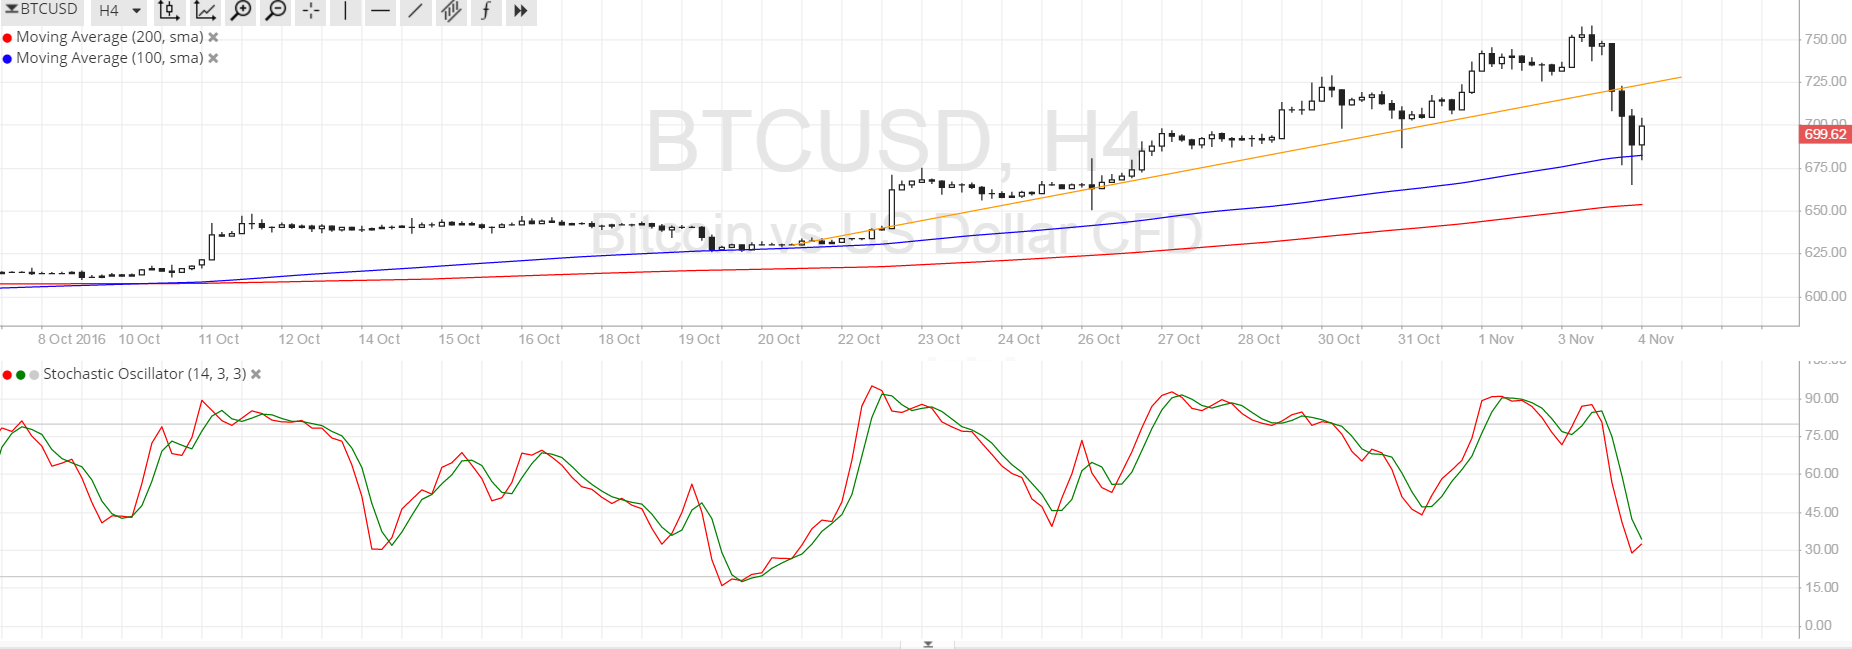 Bitcoin Price Technical Analysis for 11/04/2016 - A Much-Needed Selloff